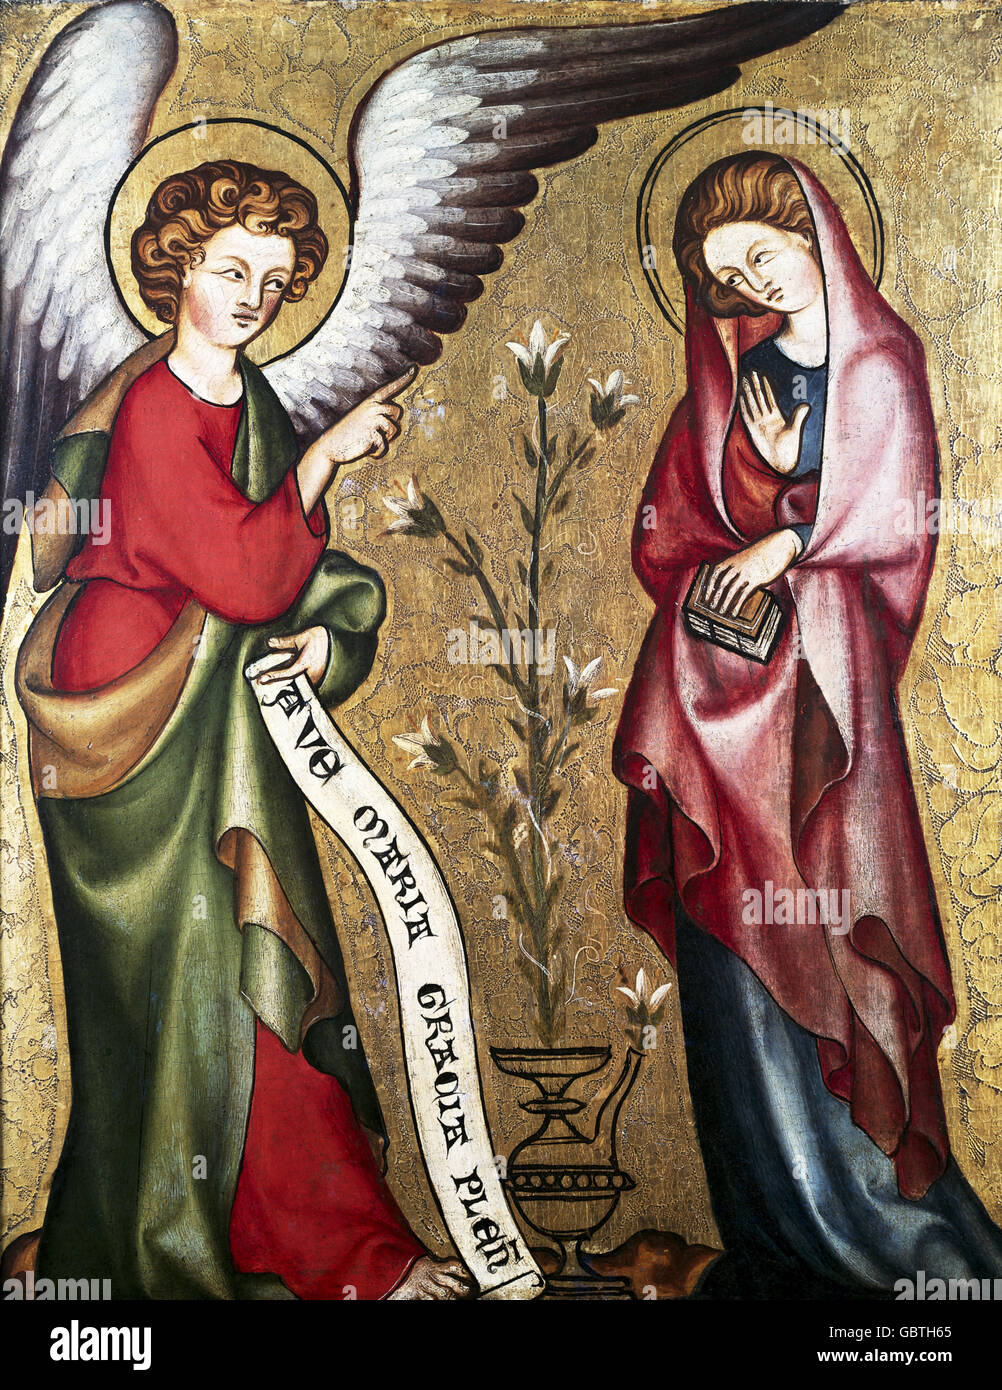 fine arts, religious art, Saint Mary, Annunciation of the Blessed Virgin Mary, painting, panel, Cologne master, circa 1310, Wallraf-Richardtz-Museum, Cologne, Stock Photo